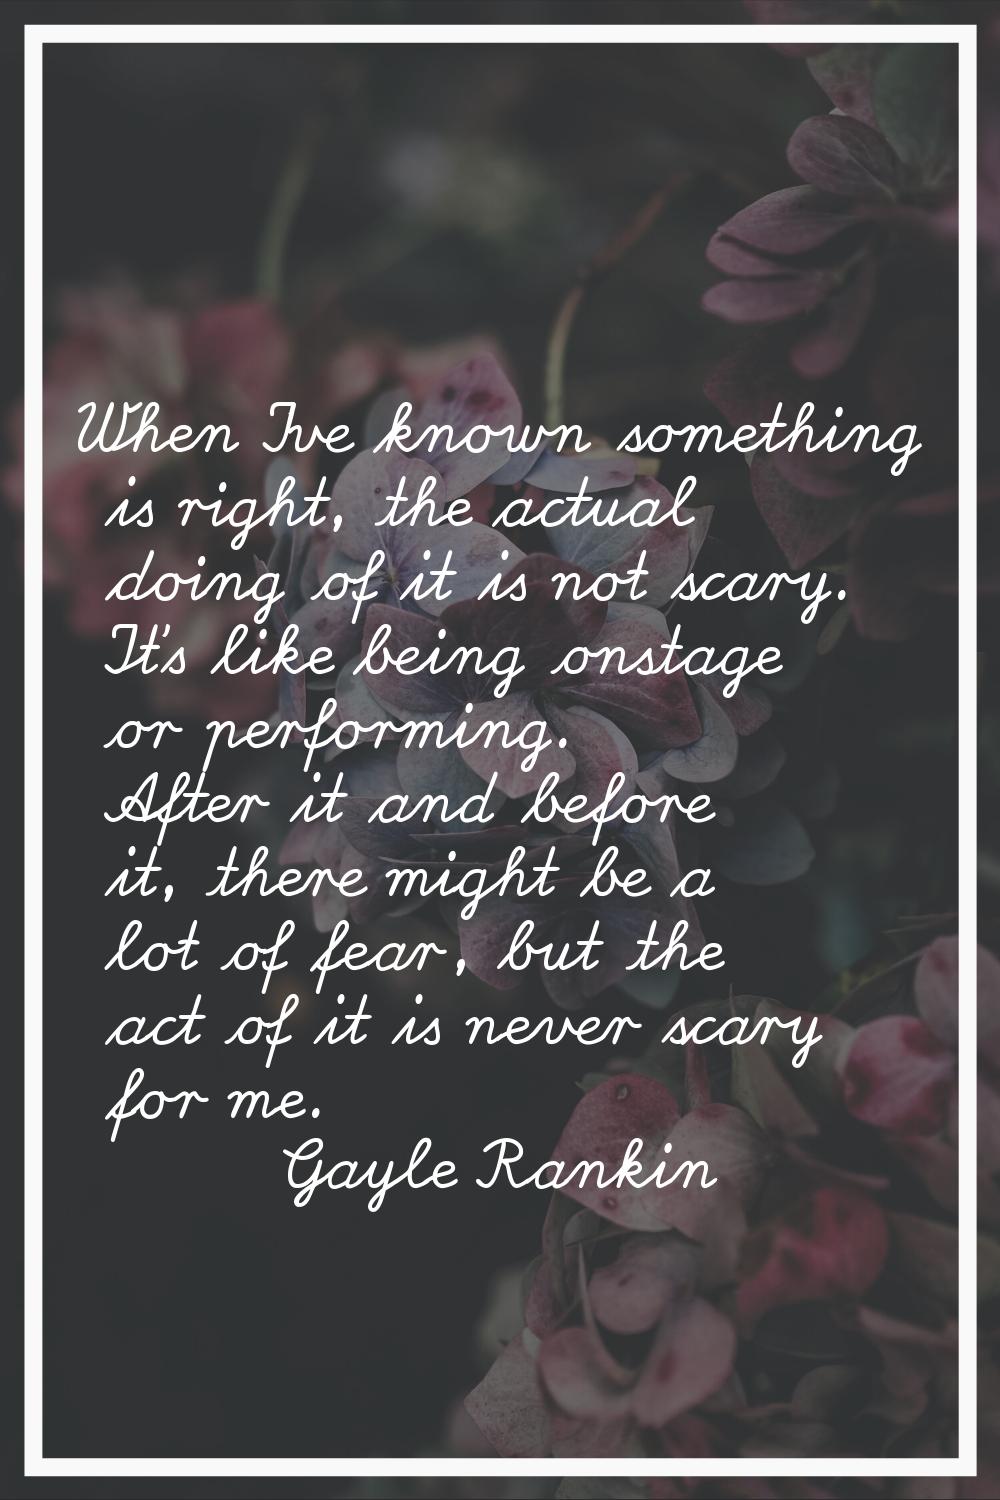 When I've known something is right, the actual doing of it is not scary. It's like being onstage or